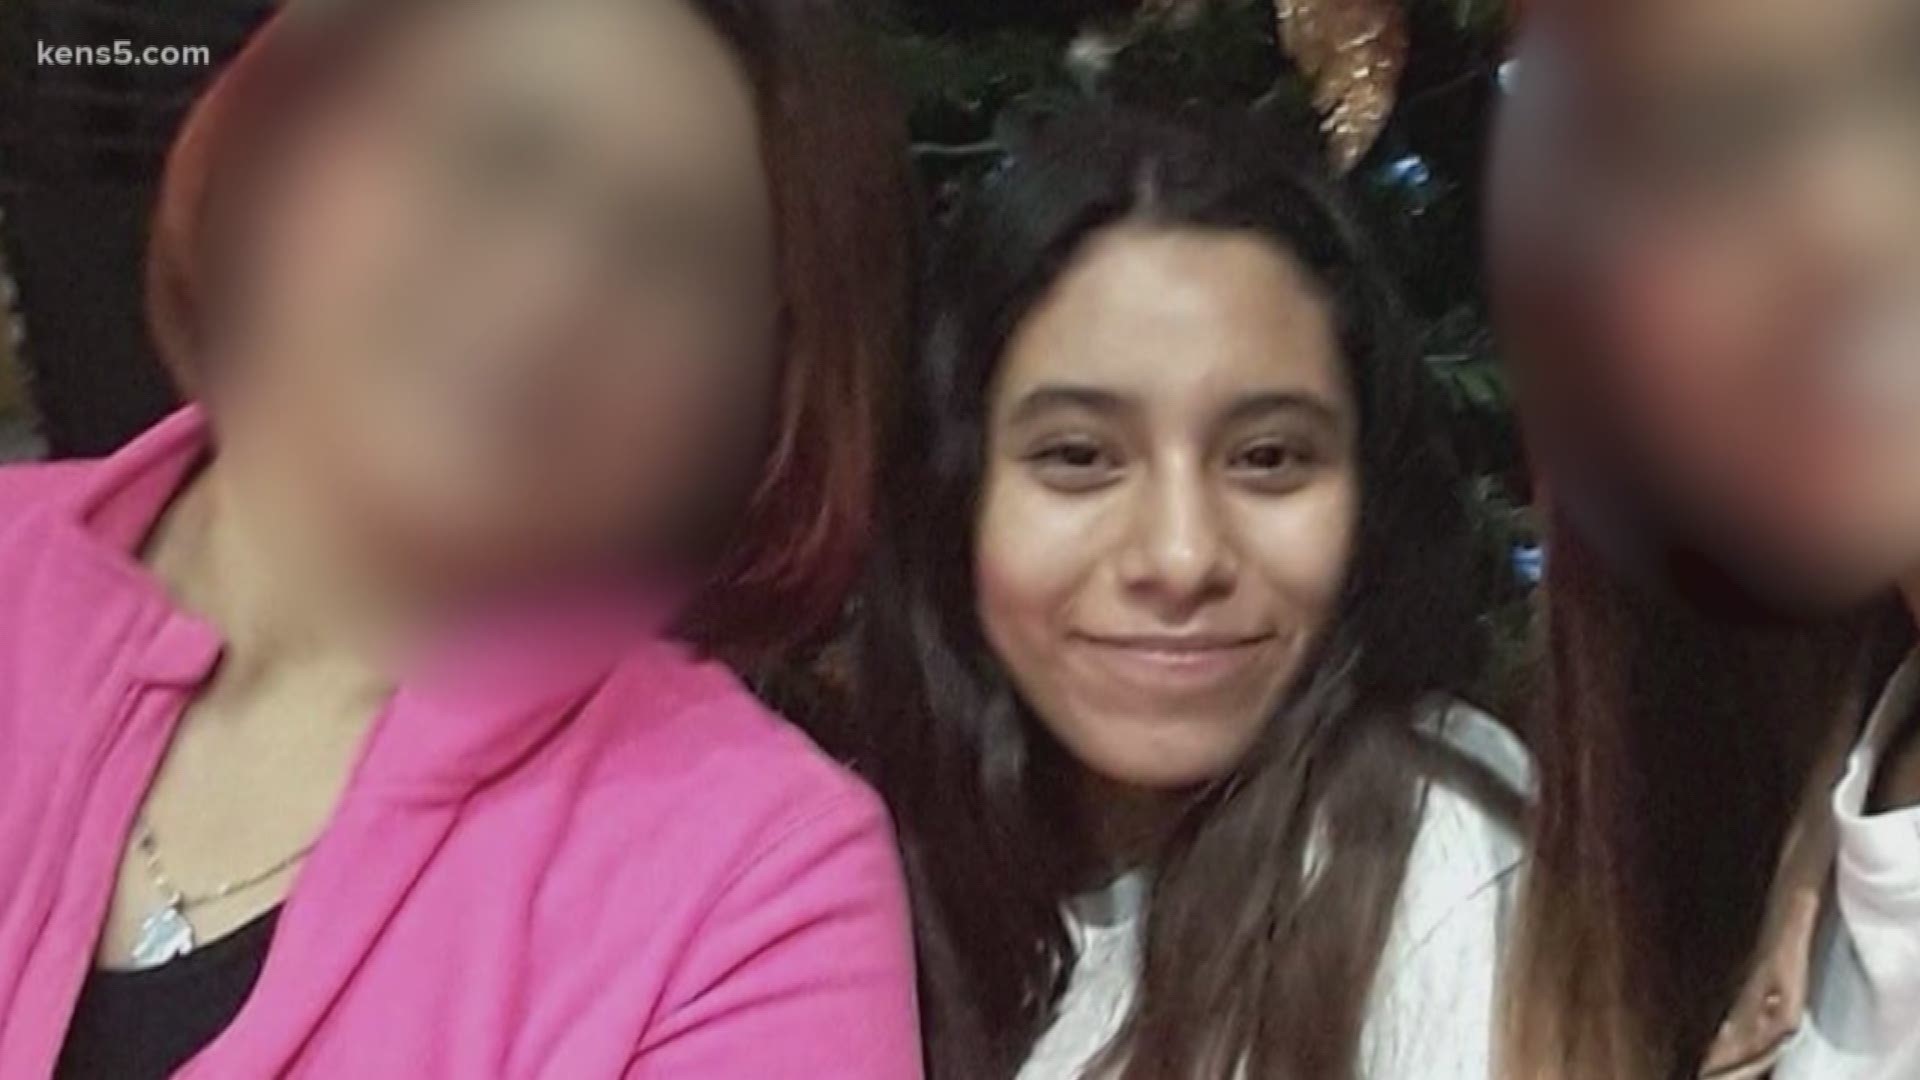 An Amber Alert was issued for a missing teen in Hondo. Investigators fear she's in danger. Eva Marie Garcia hasn't been seen since October.